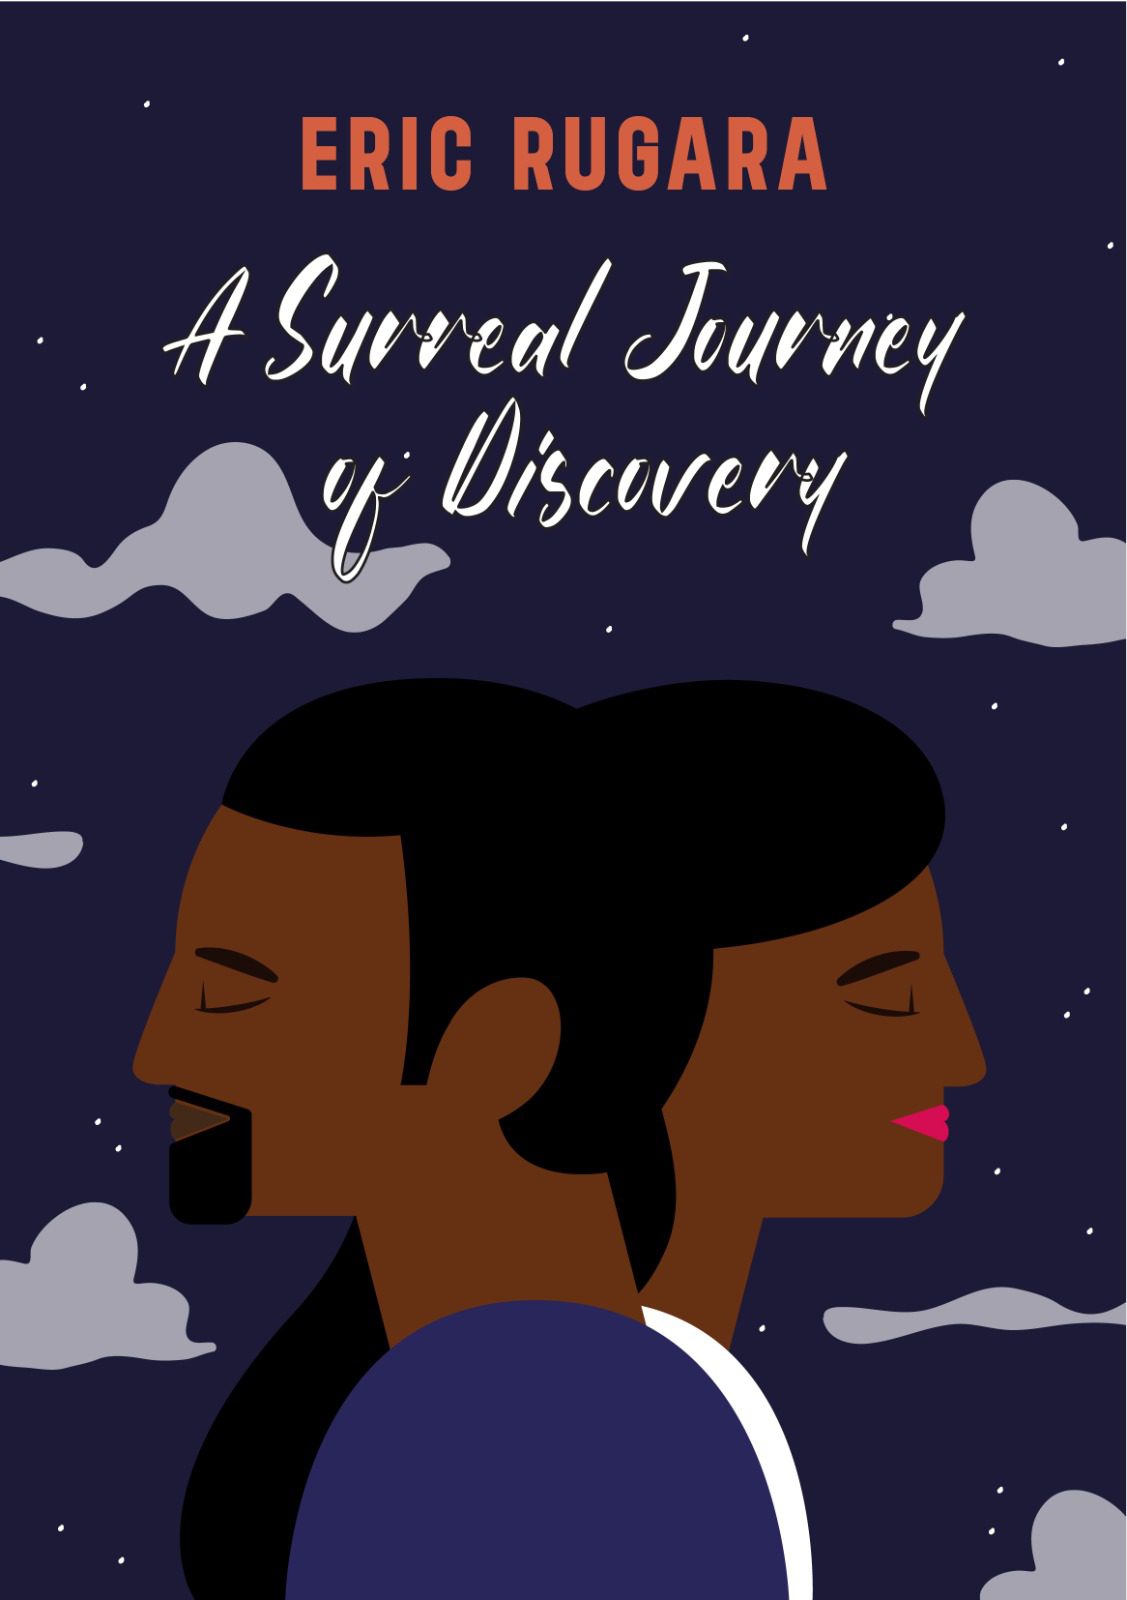 Book cover for Eric Rugara's self-published anthology 'A Surreal Journey of Discovery'.